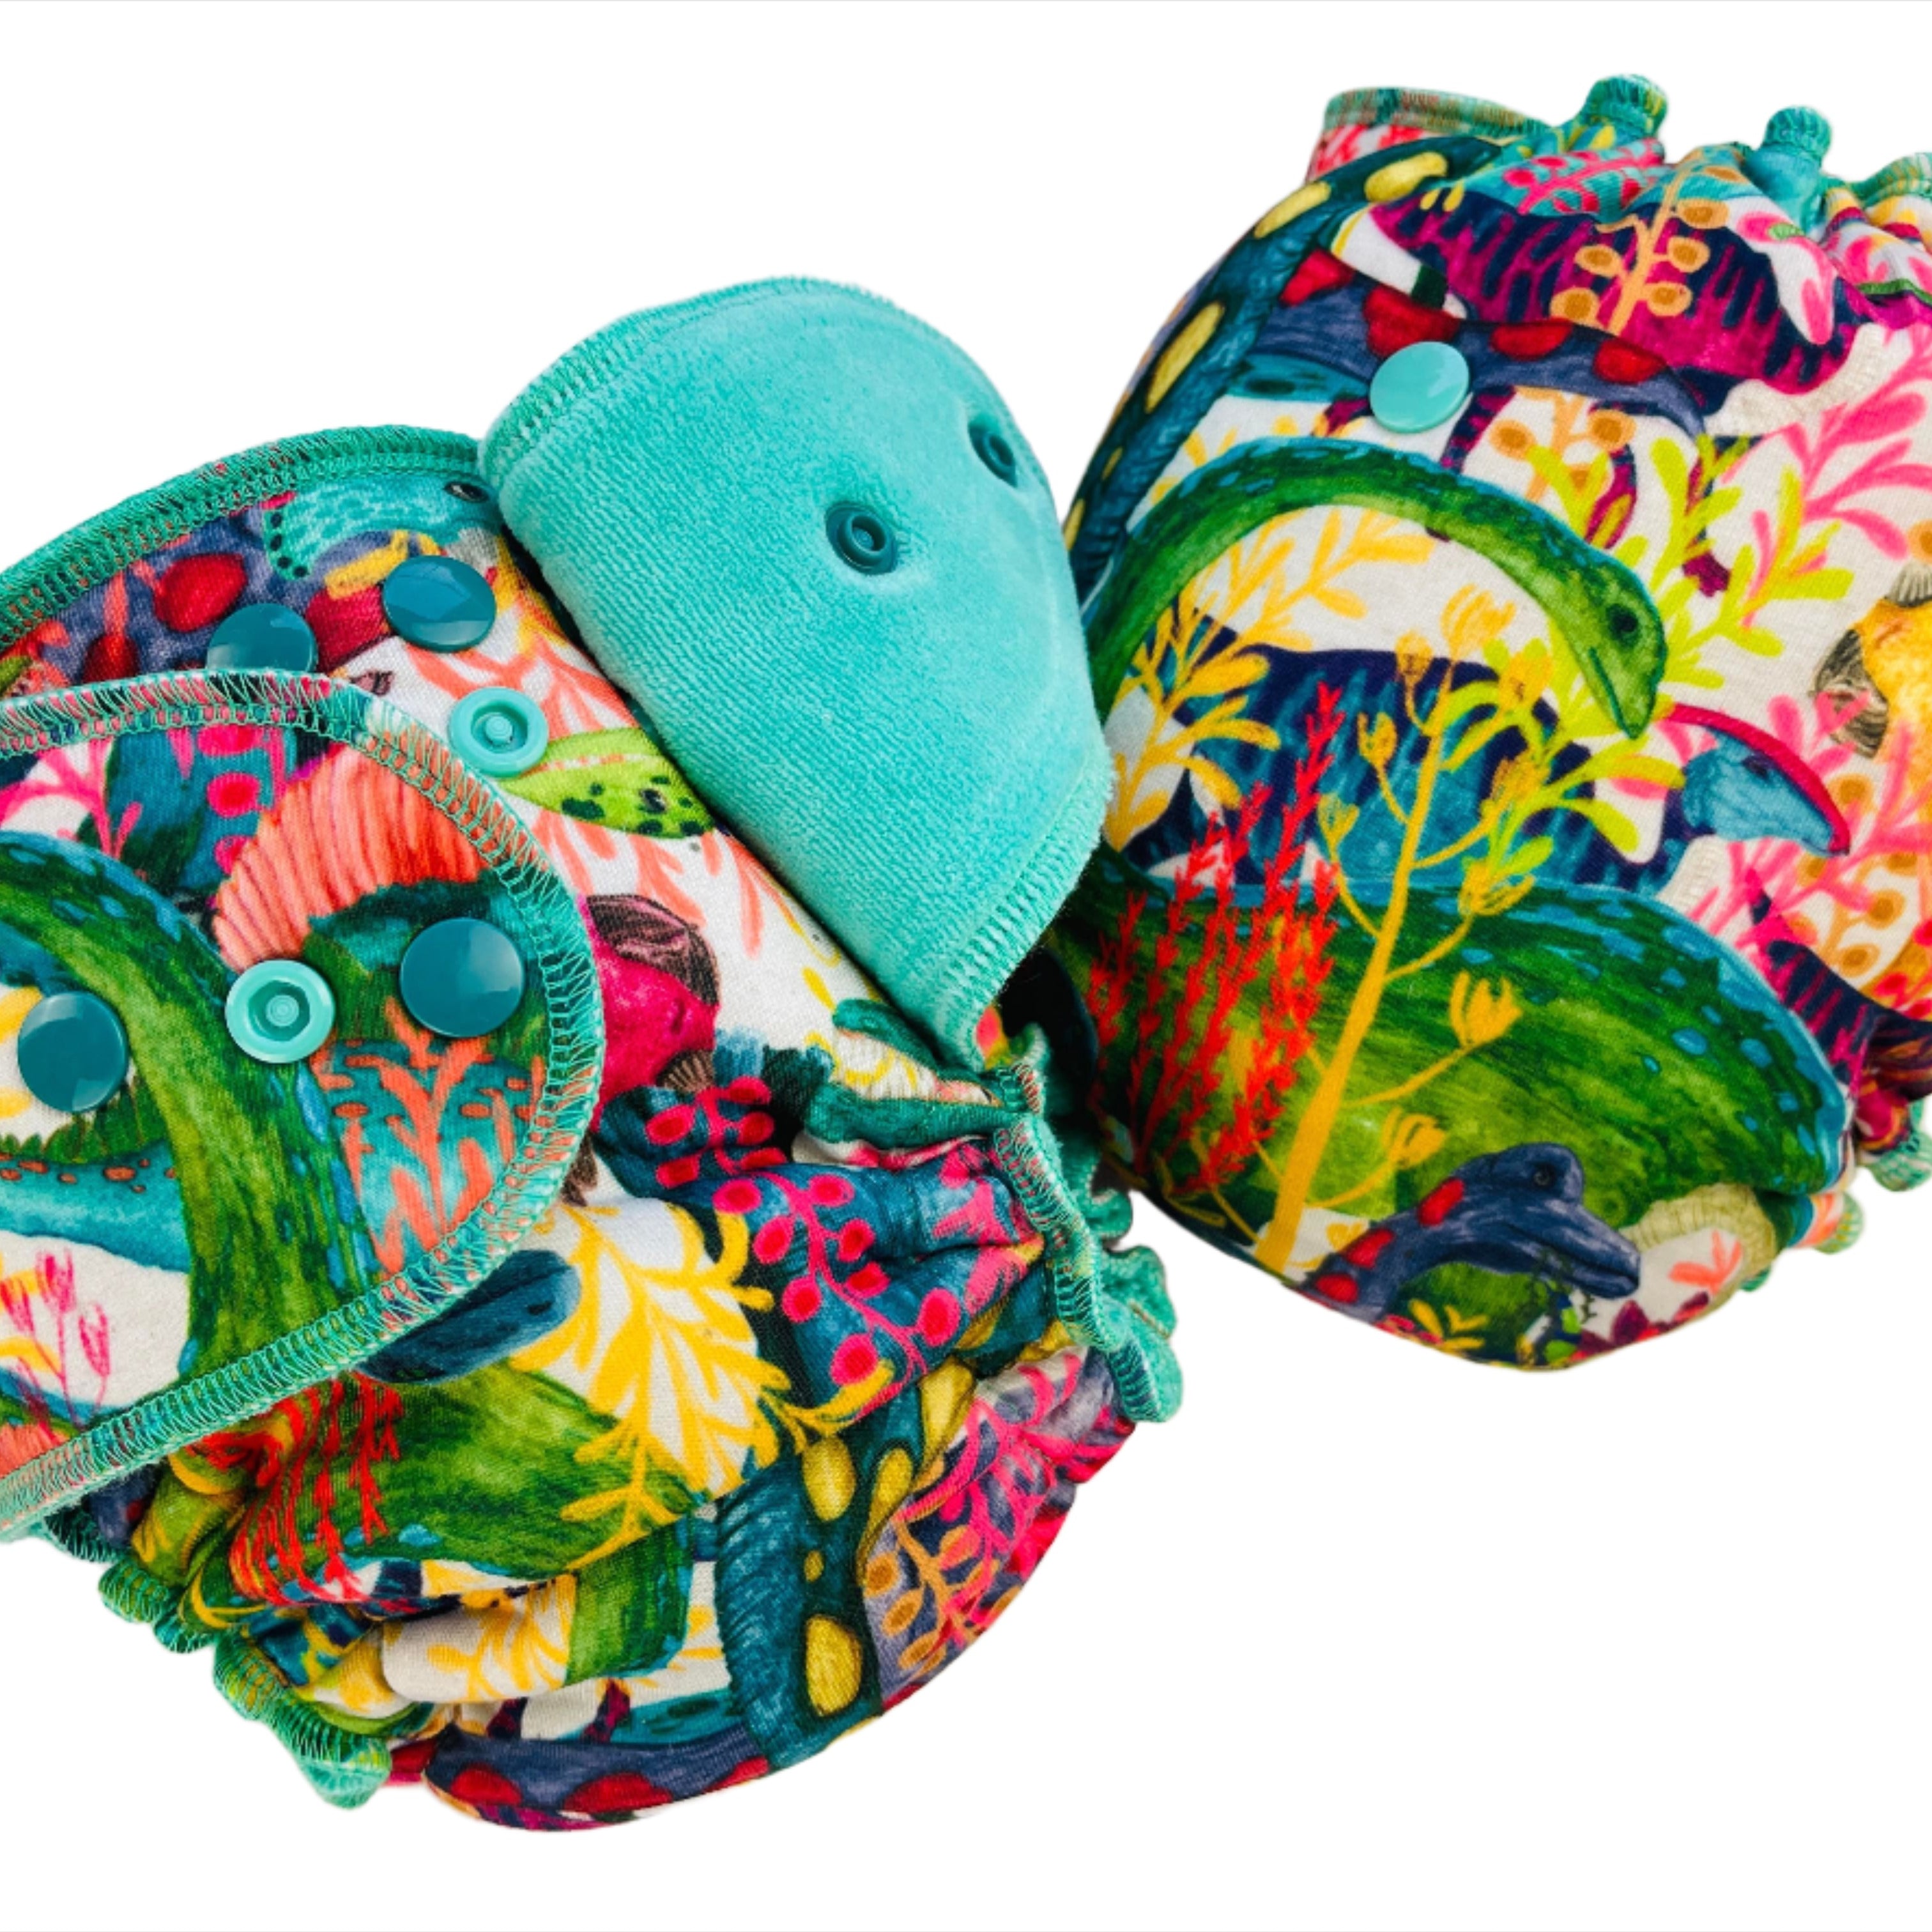 Lilly & Frank One Size Cloth Diaper Dinosaur Jamboree One Size Cloth Diaper - Fitted - Serged